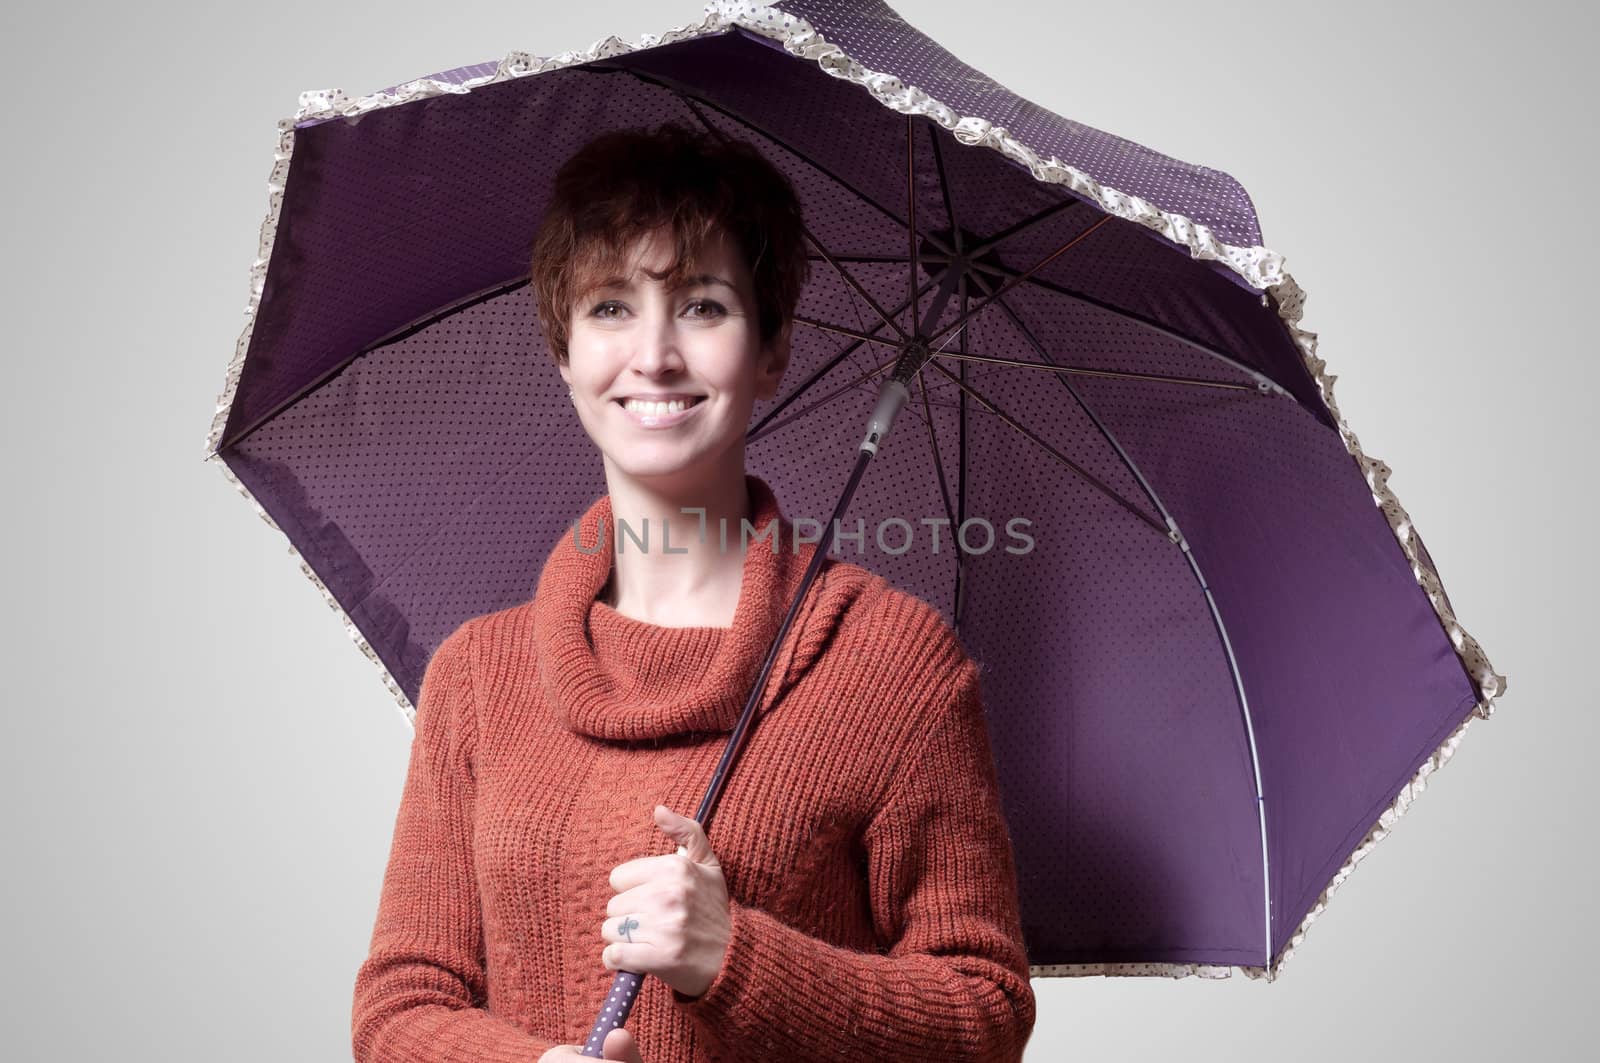 beautiful woman with sweater and umbrella on gray background